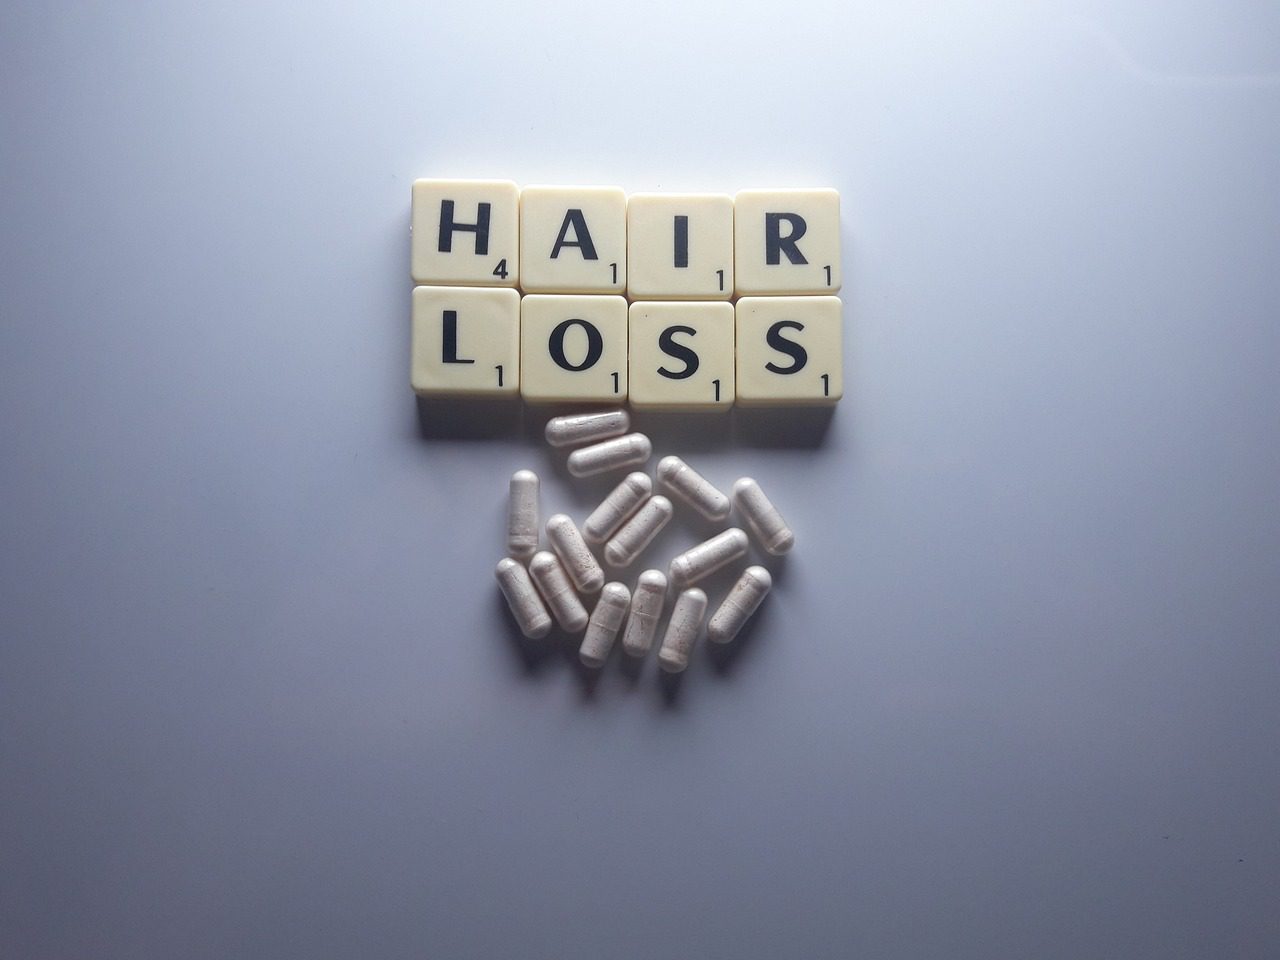 Treatment Options for Hair Loss